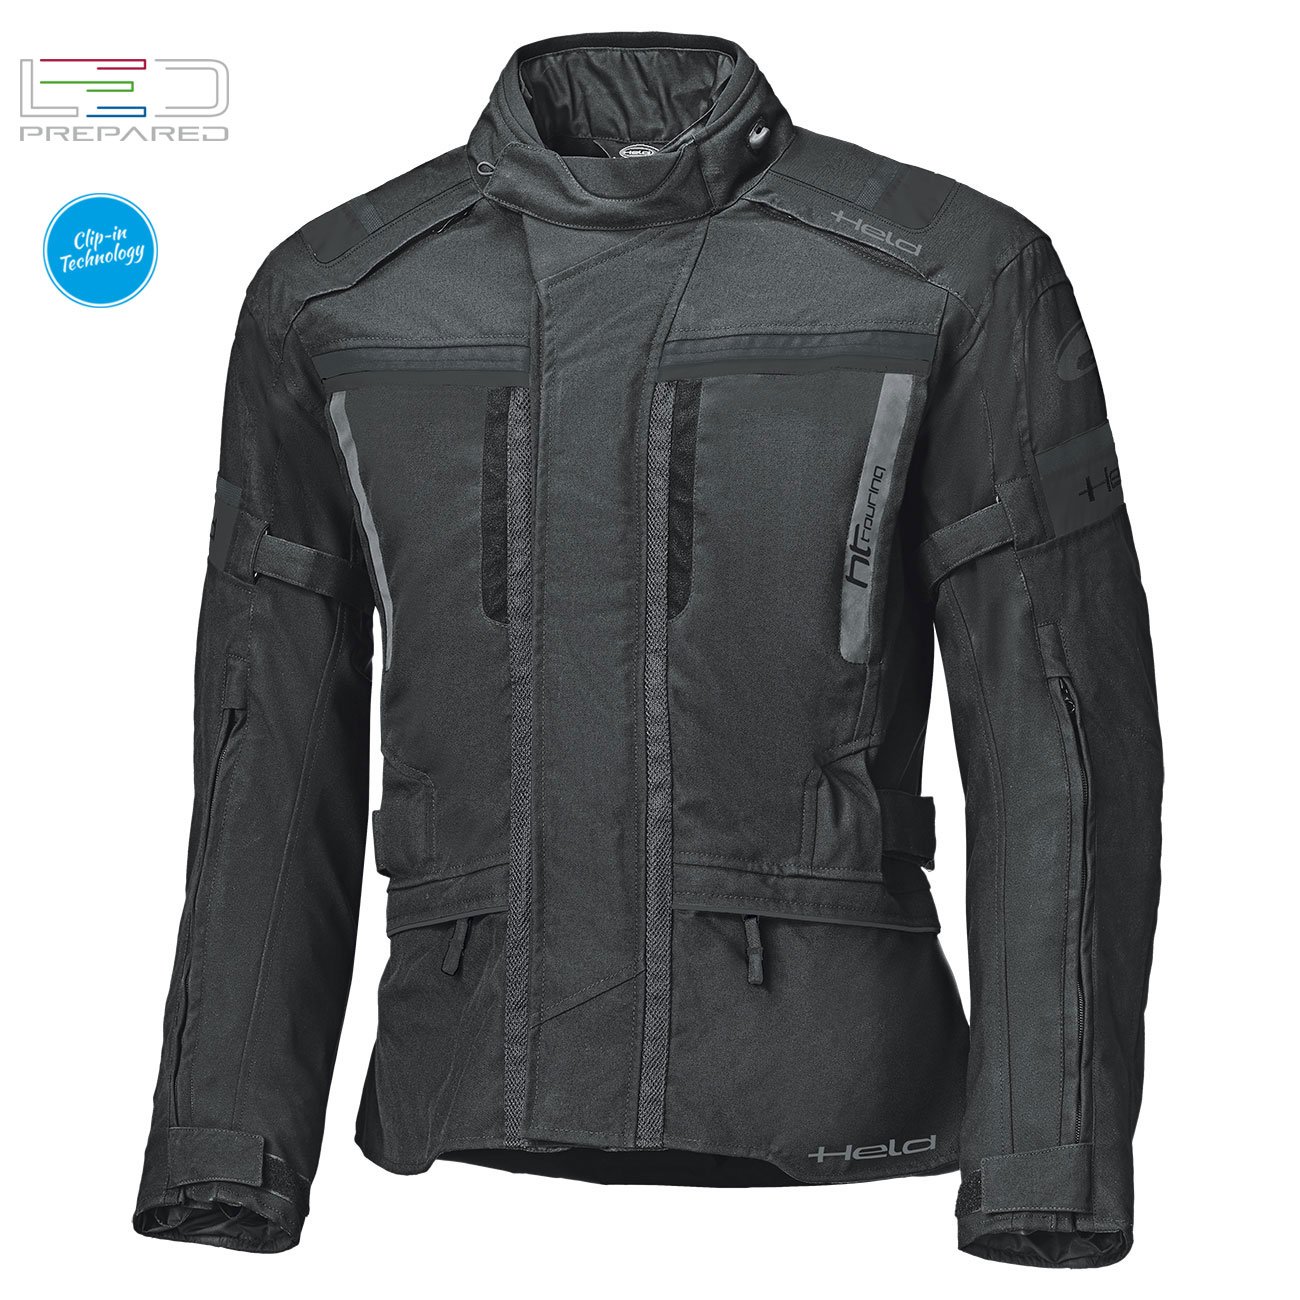 Image of Held Tourino Top Jacket Black Size S ID 4049462910874